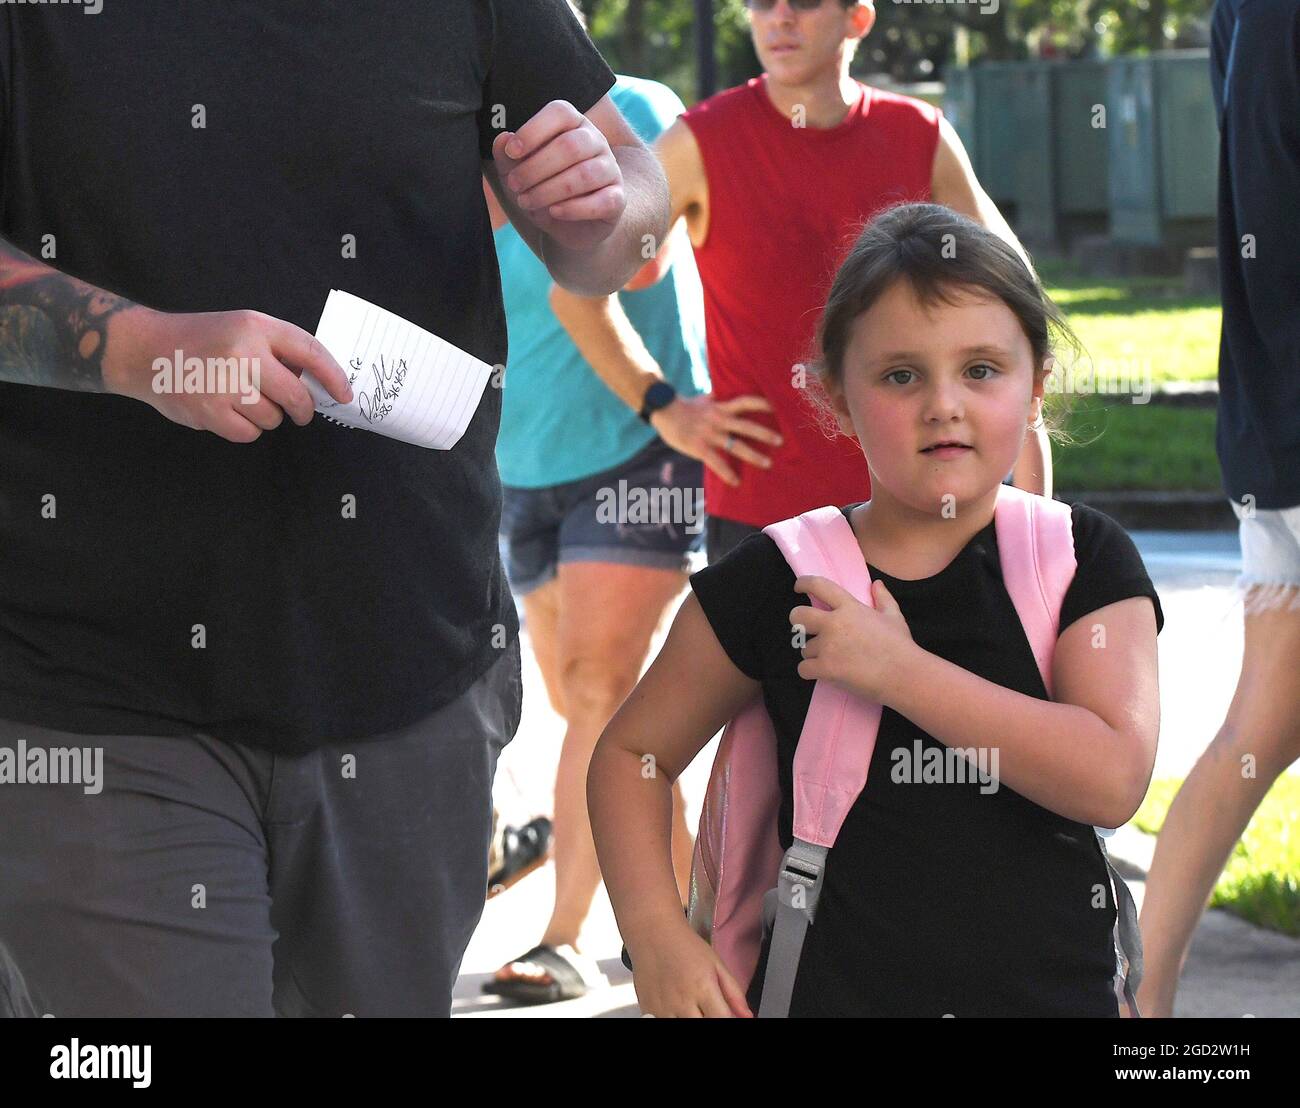 Orlando, United States. 10th Aug, 2021. A young girl arrives on the first day of classes for the 2021-22 school year at Baldwin Park Elementary School. Due to the current surge in COVID-19 cases in Florida, Orange County public schools have implemented a face mask mandate for students for 30 days unless a parent chooses to opt out of the requirement. (Photo by Paul Hennessy/SOPA Images/Sipa USA) Credit: Sipa USA/Alamy Live News Stock Photo